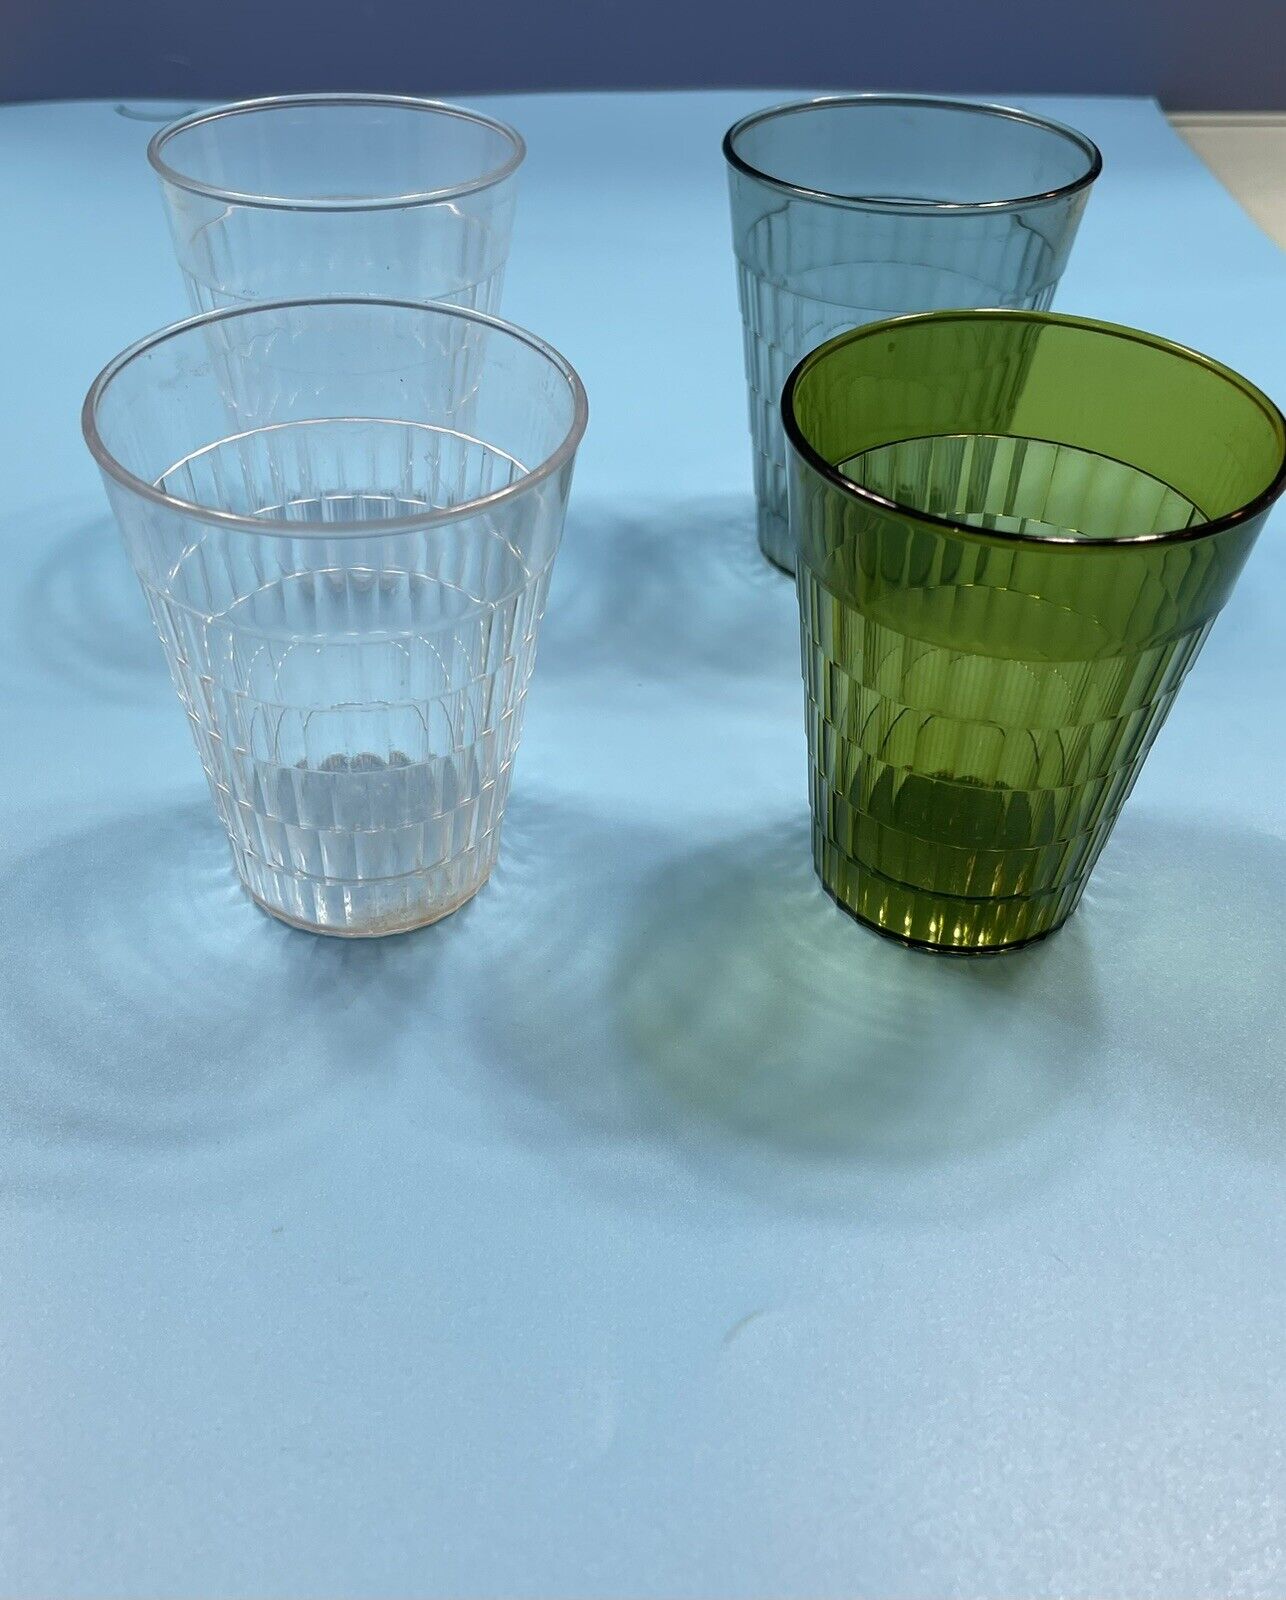 4 Vintage Small Plastic Textured Cups Green/White/Blue